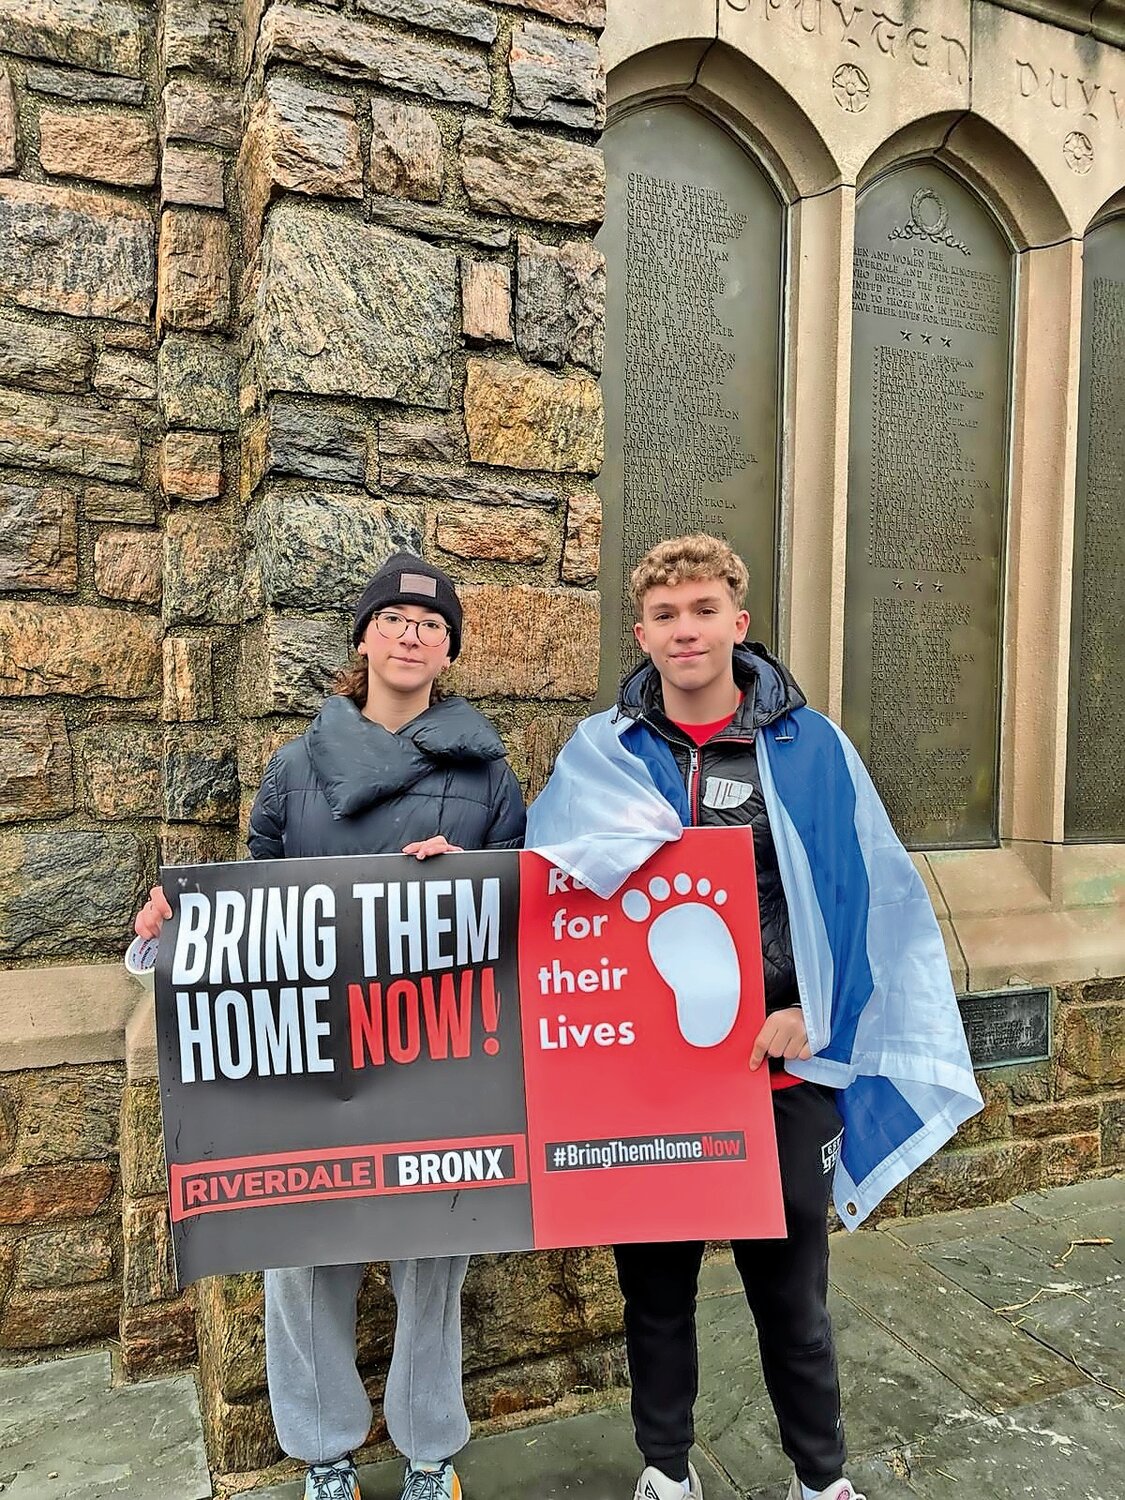 Riverdalians Netta Pack (left) and Ari Vogel, who organized the Riverdale Run For Their Lives, stand for the hostages in front of the Bell Tower on West 239th Street at Riverdale Avenue.